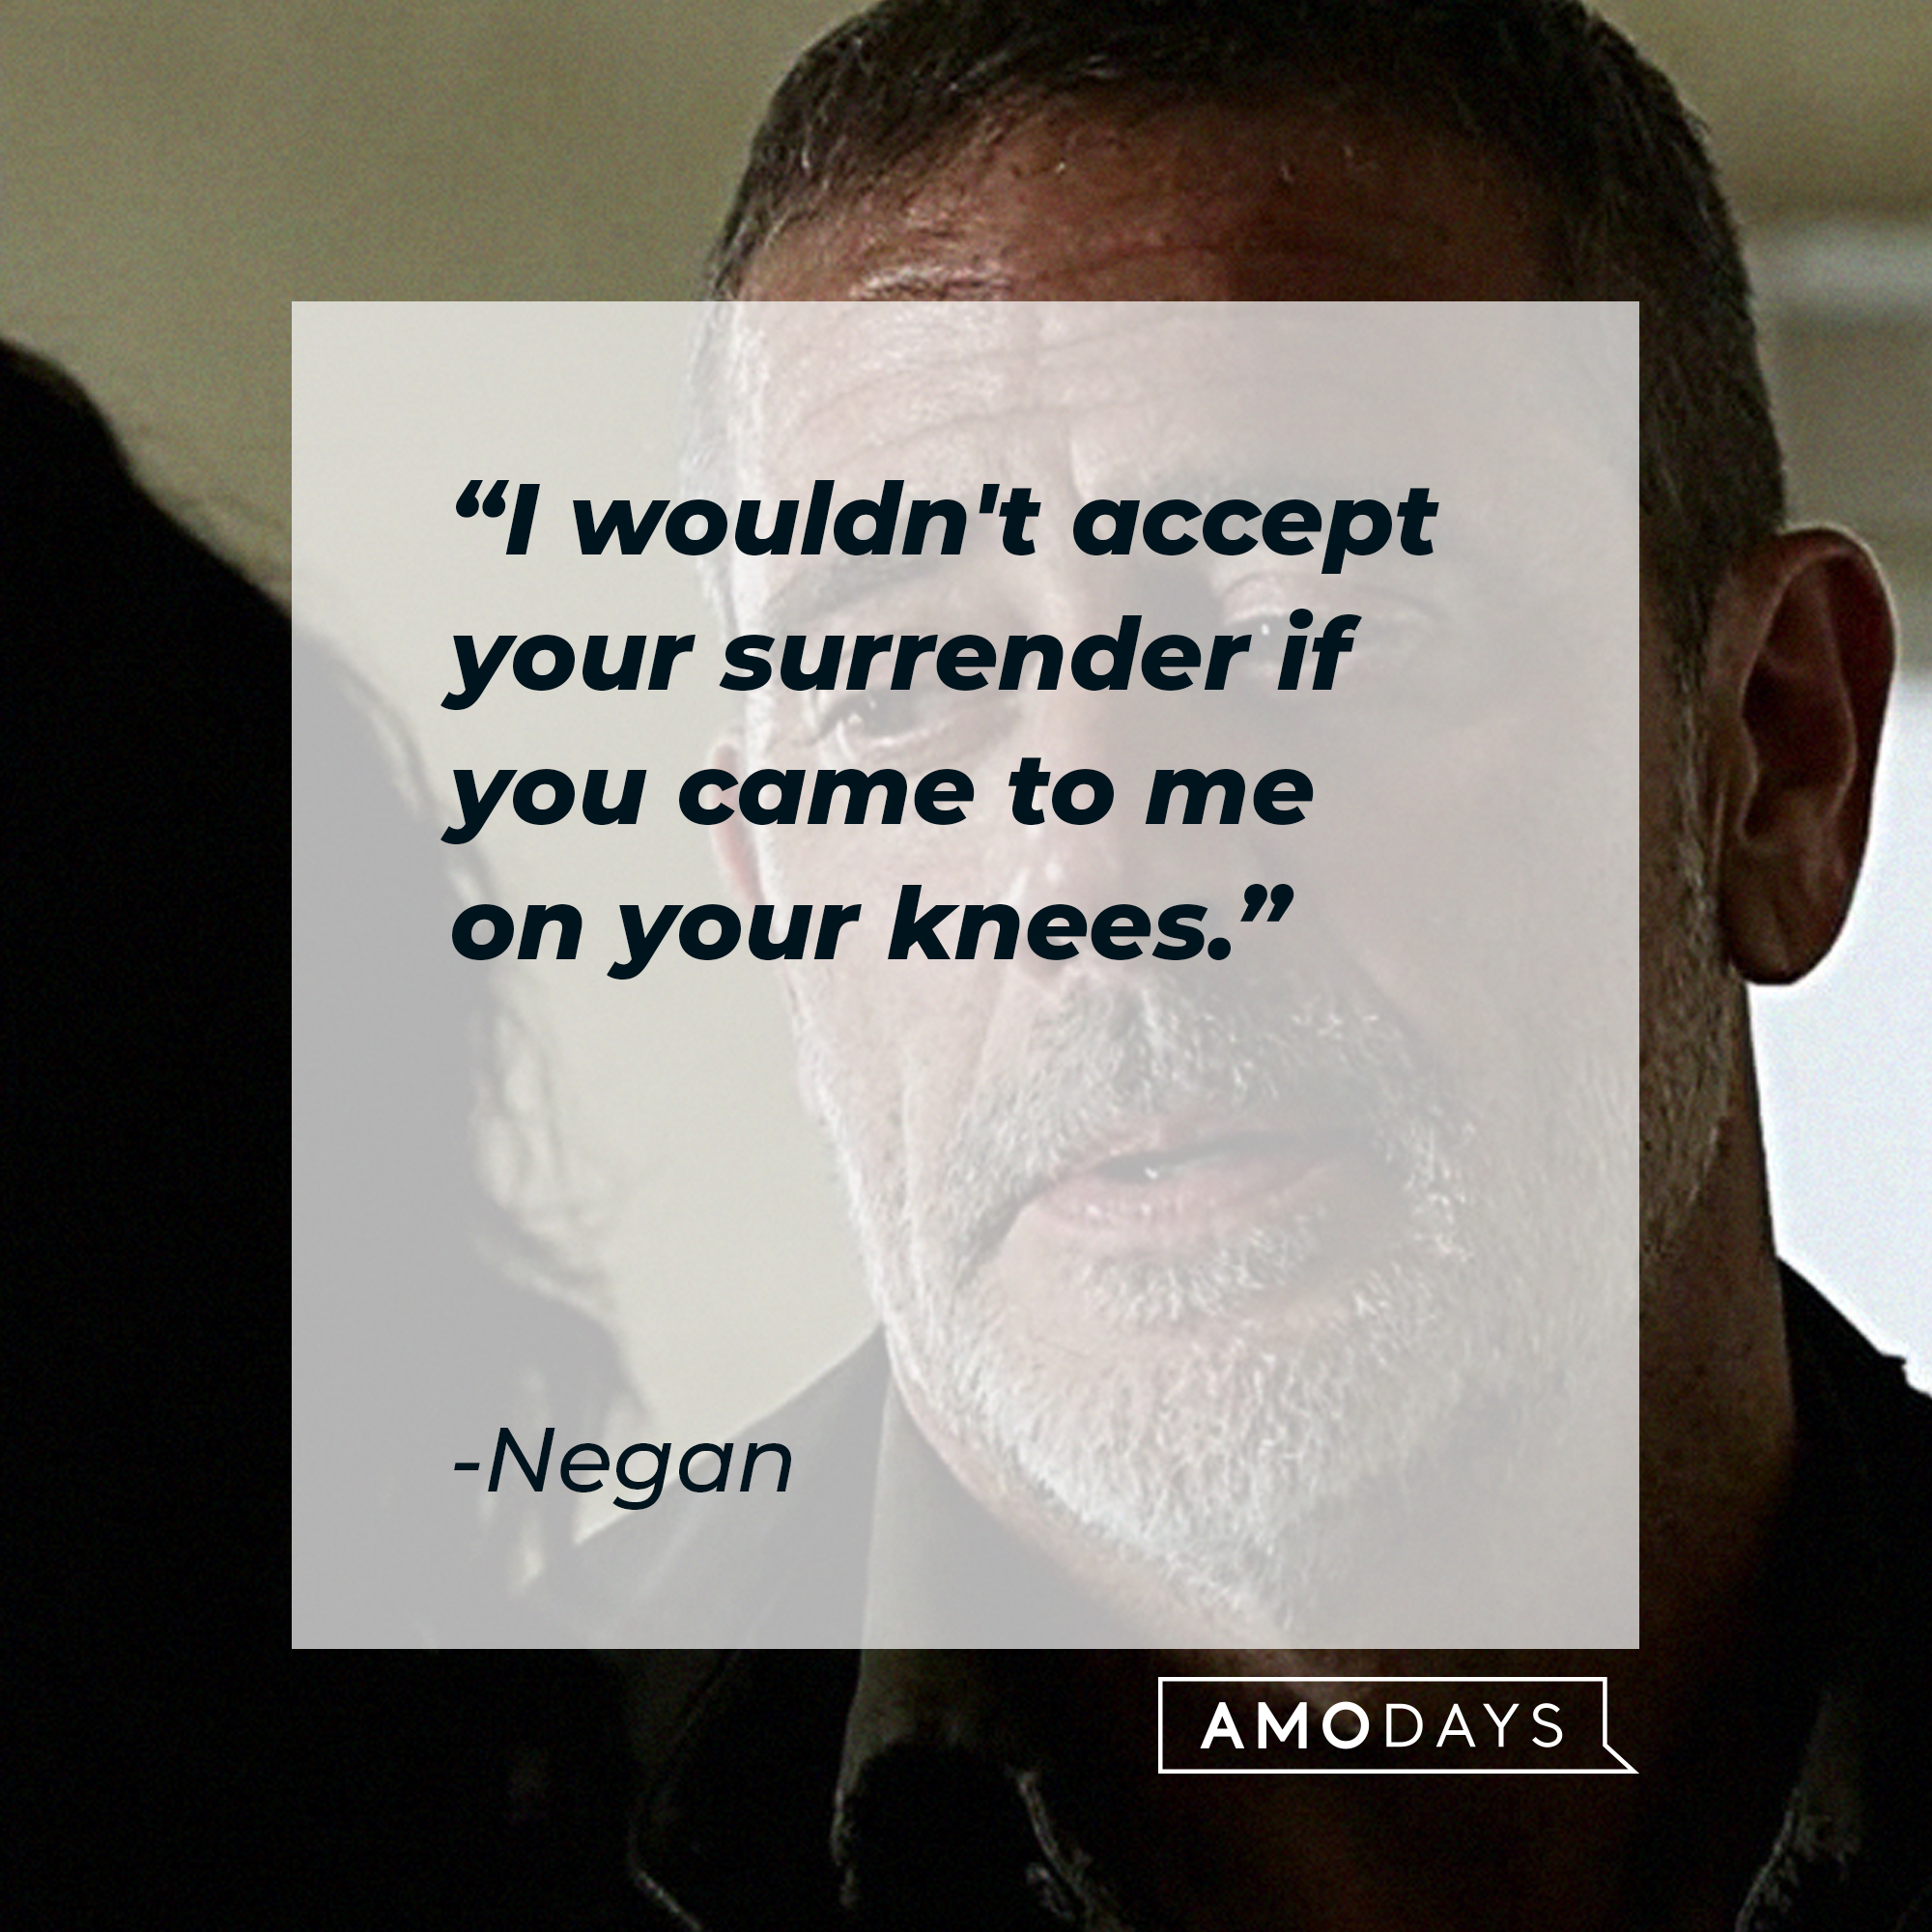 Negan' quote: "I wouldn't accept your surrender if you came to me on your knees." | Source: Facebook/TheWalkingDeadAMC